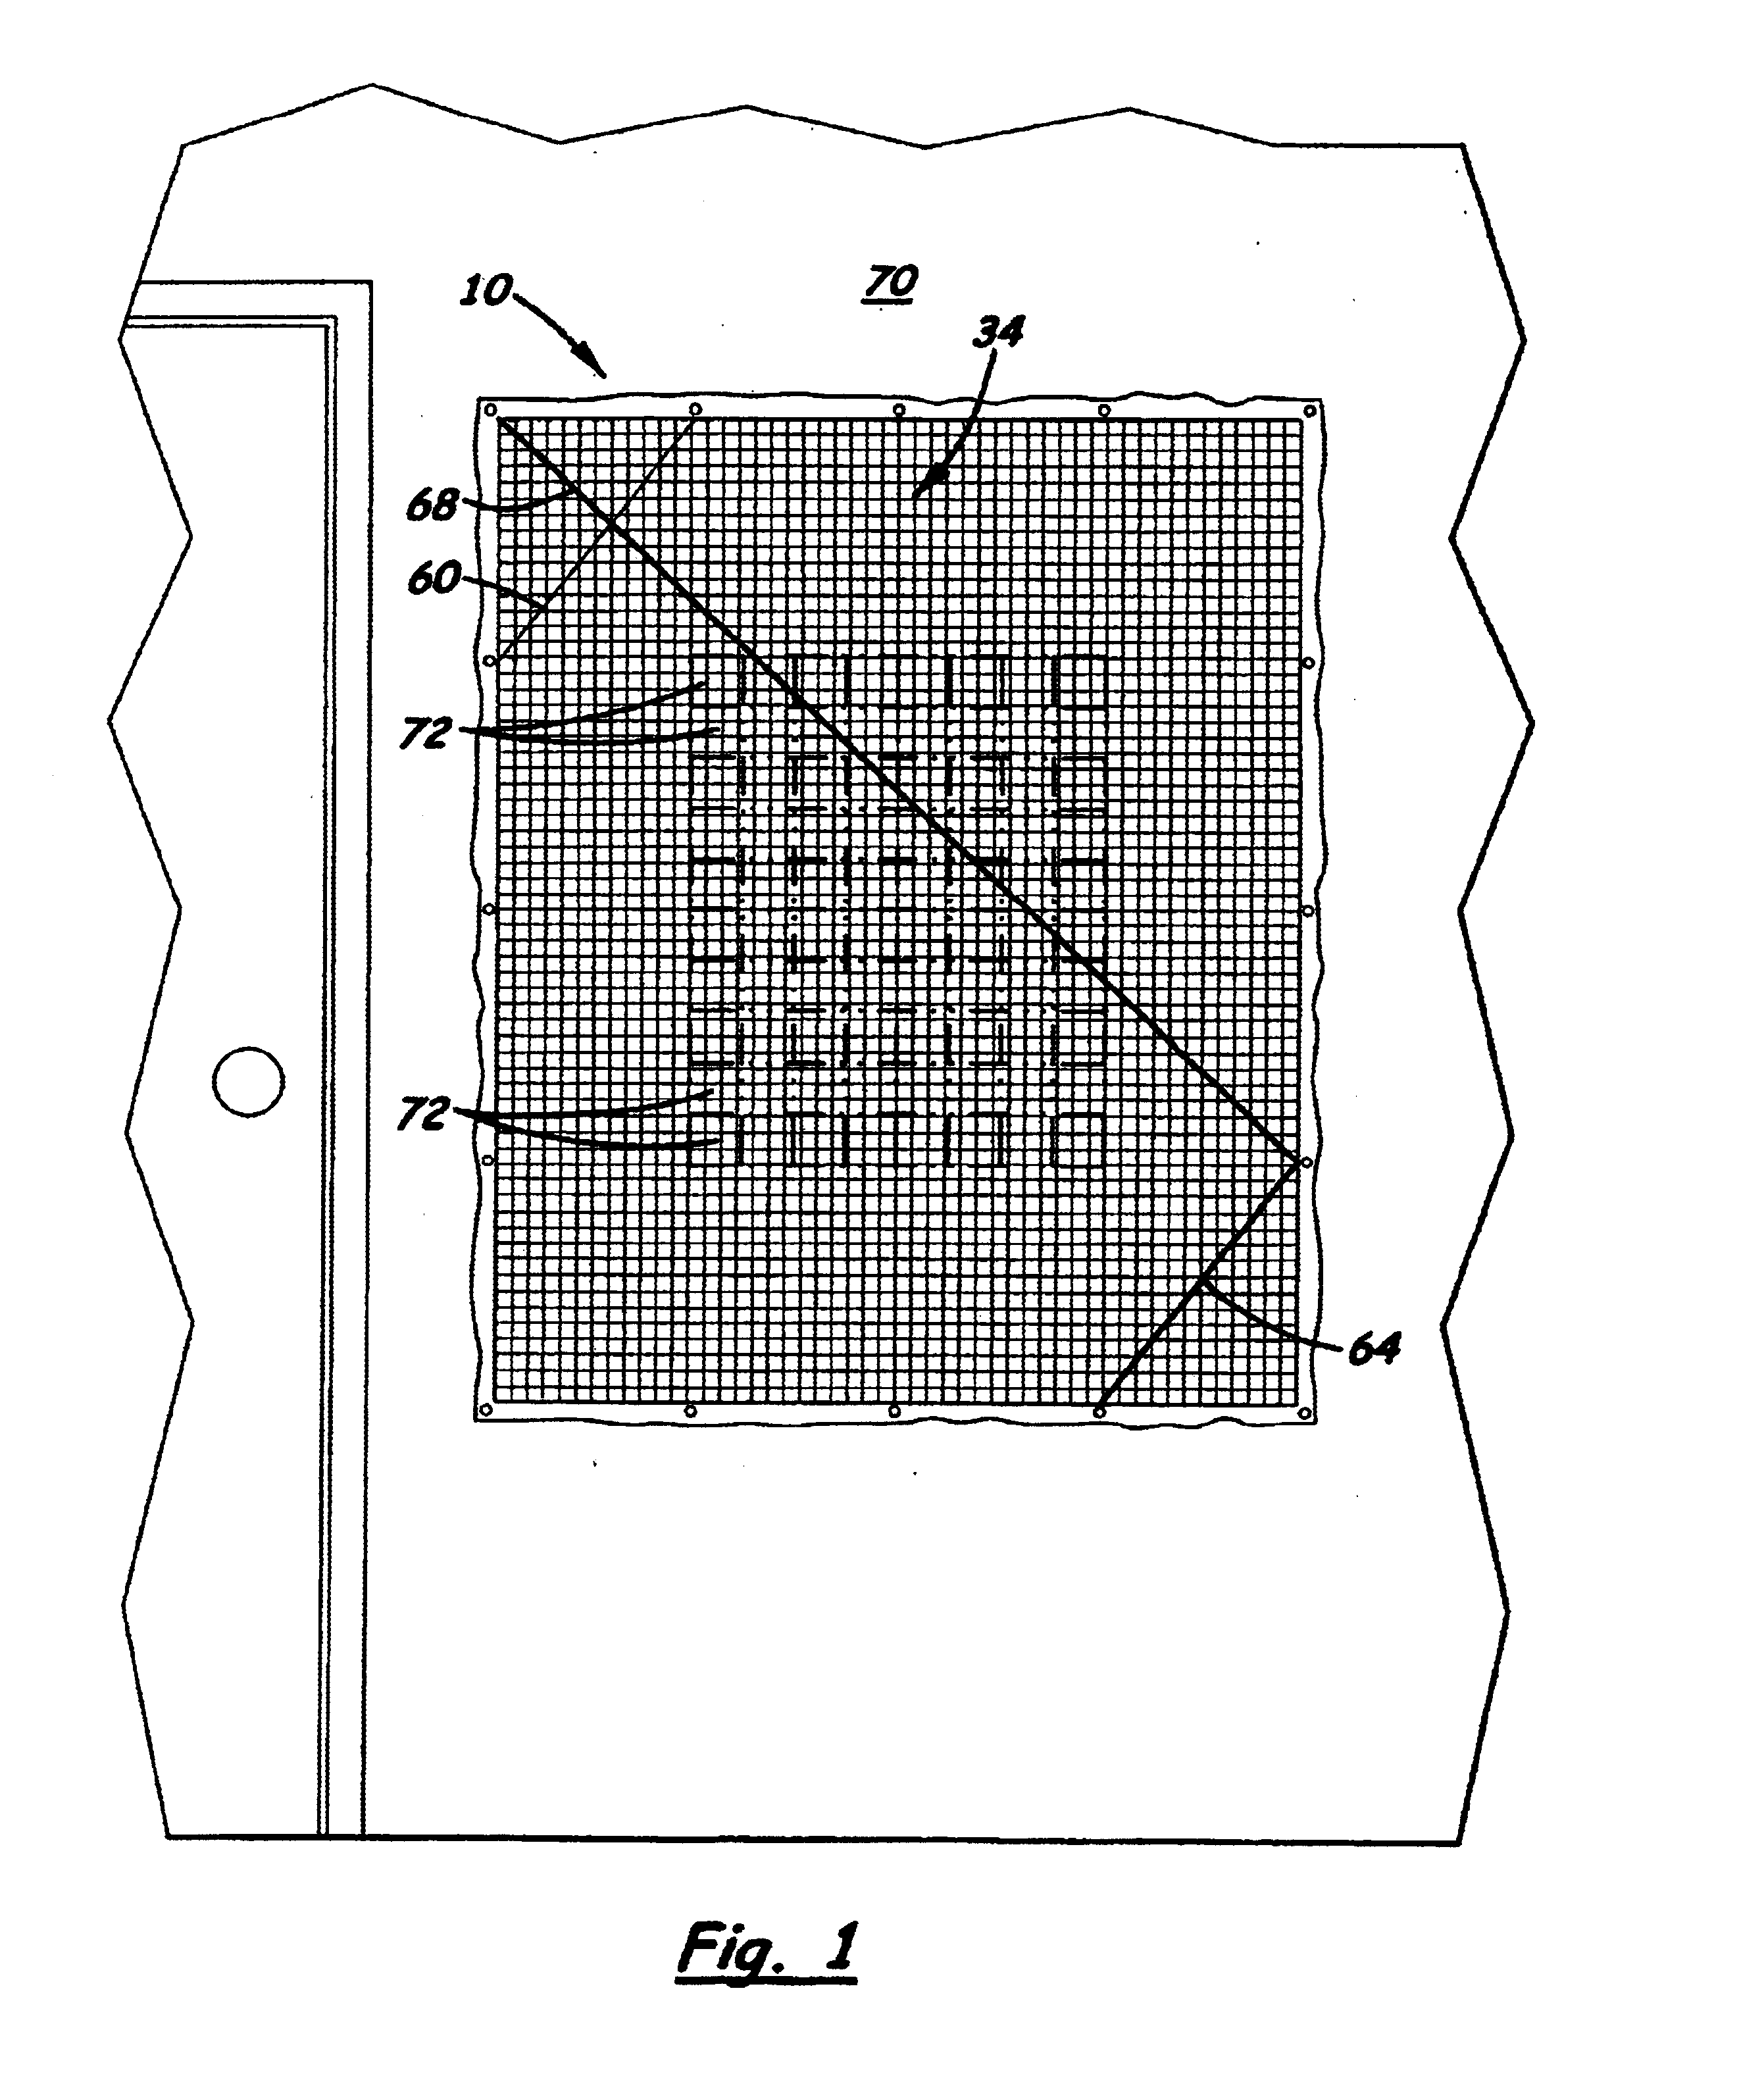 Quilt design holding device and method